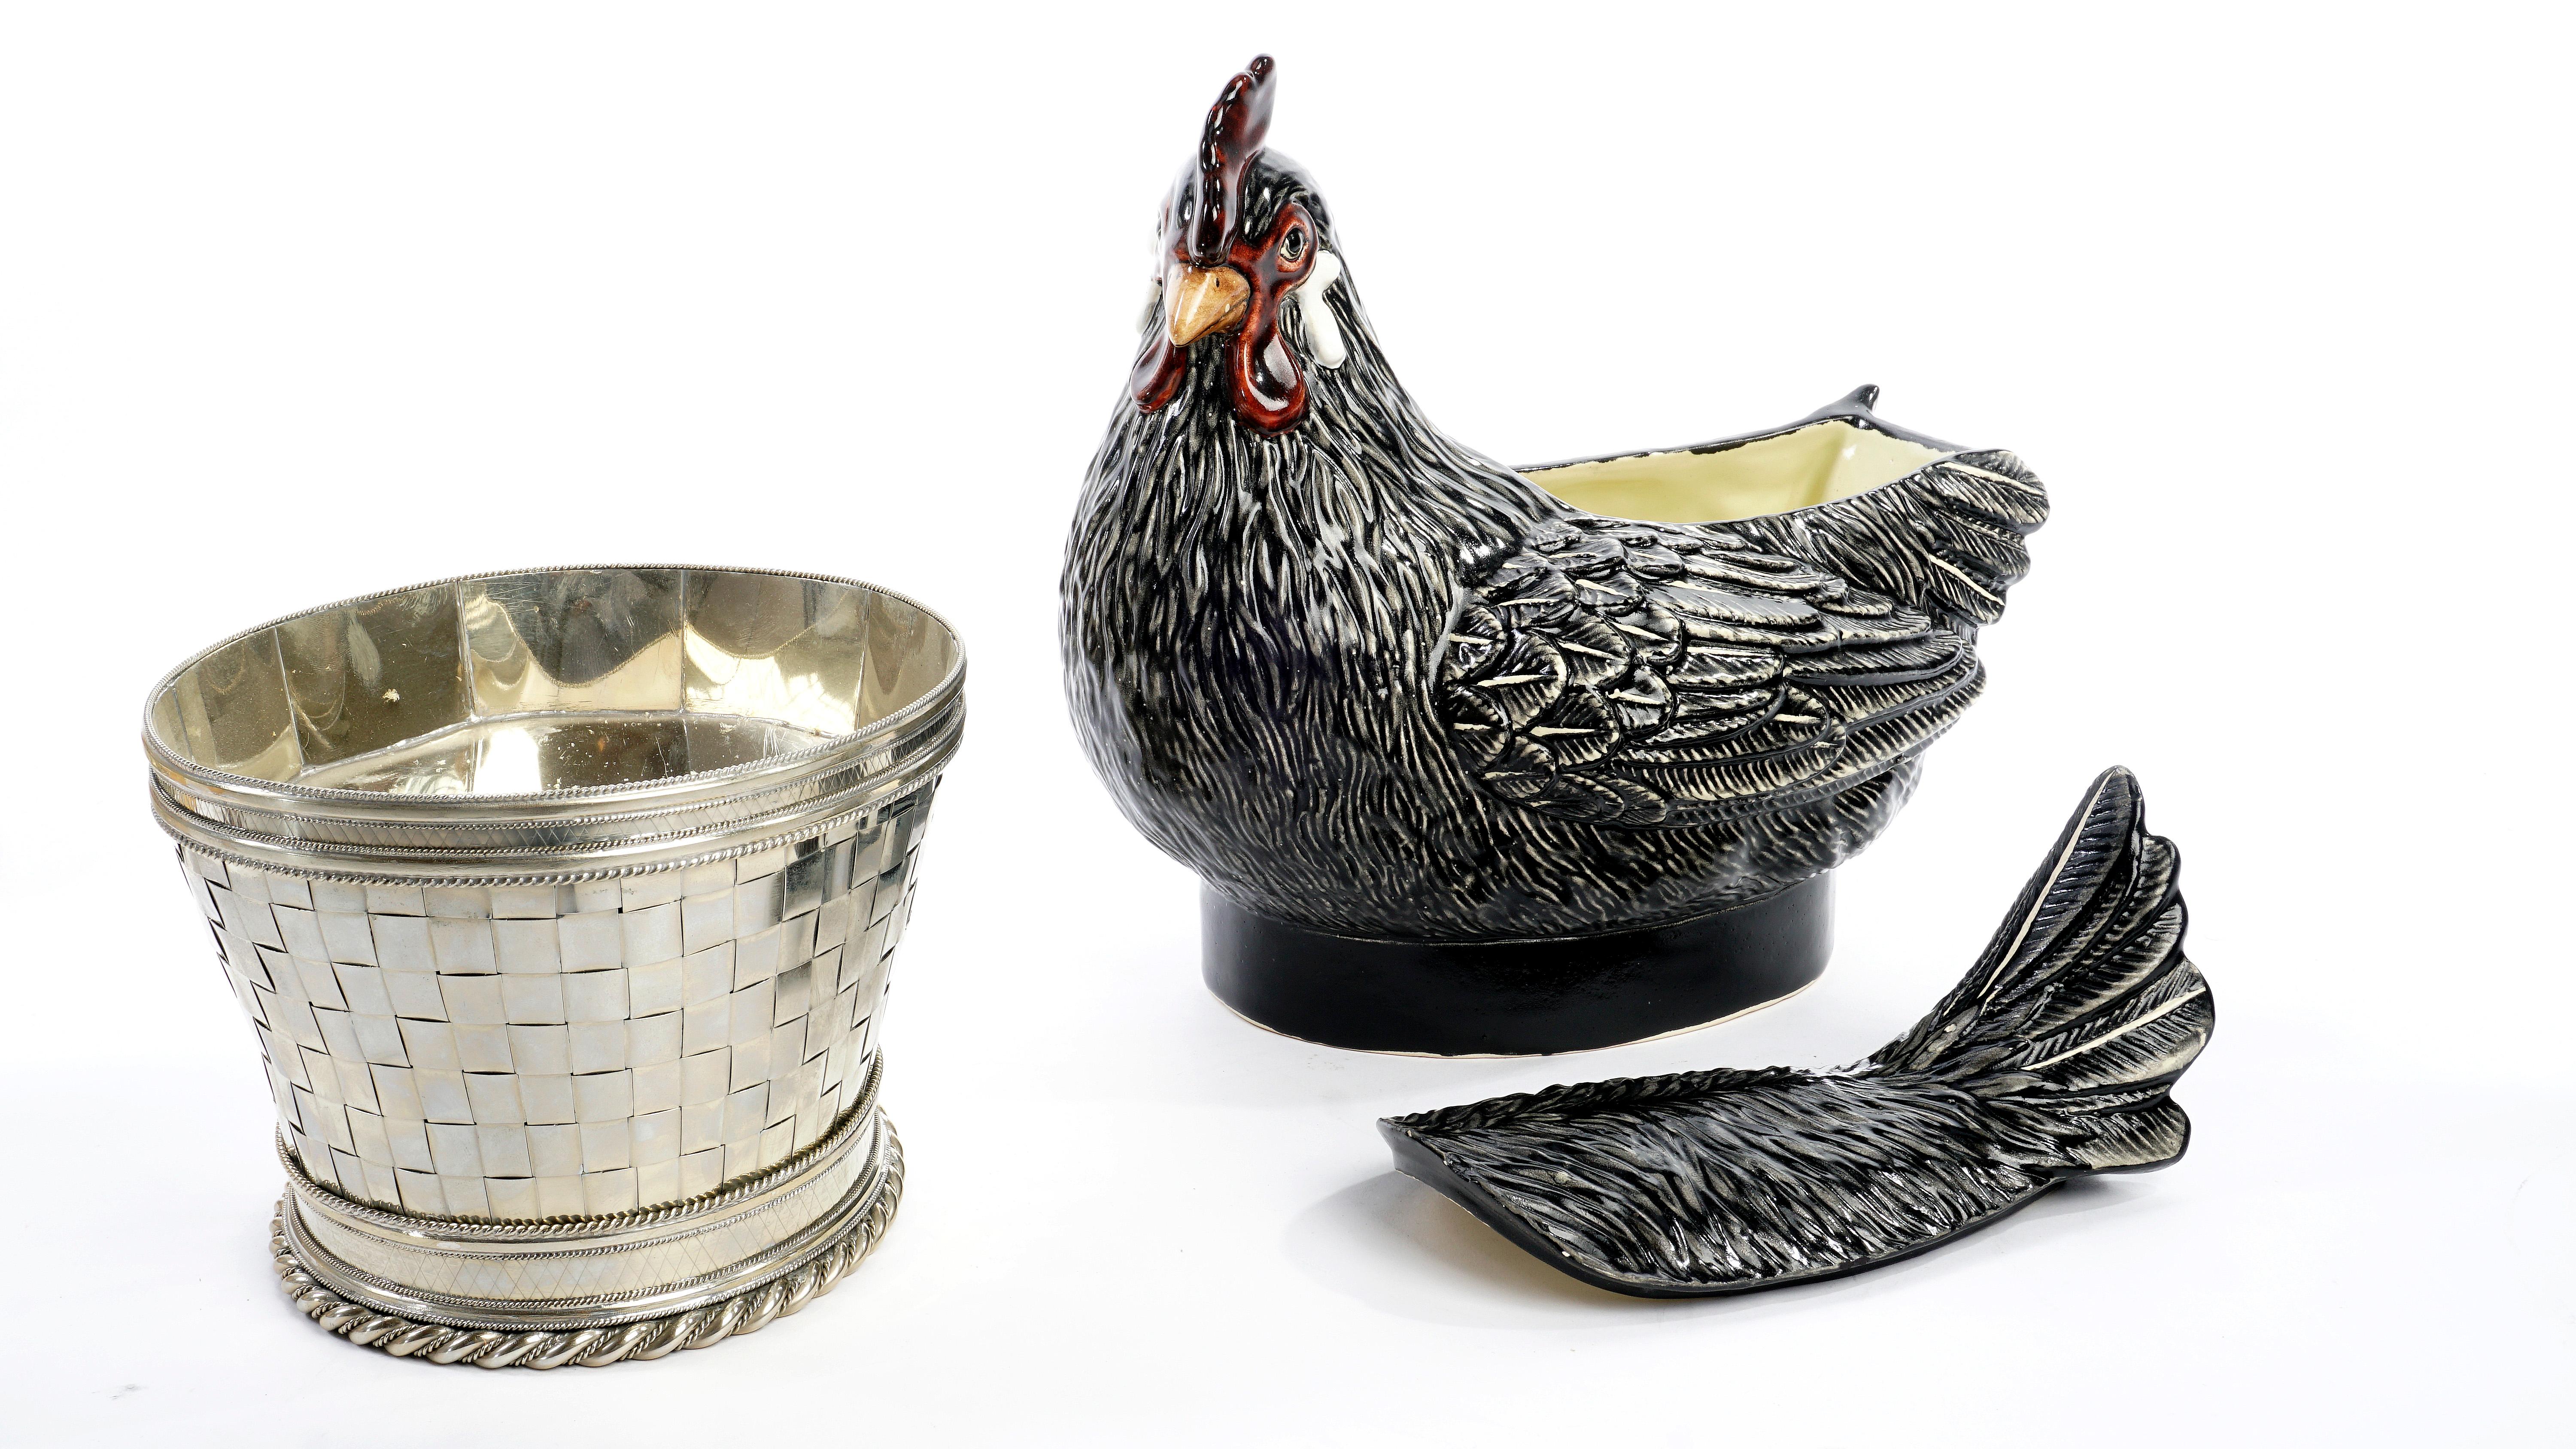 Glazed Chicken, Rooster and Chicks, Ceramic and White Metal 'Alpaca'